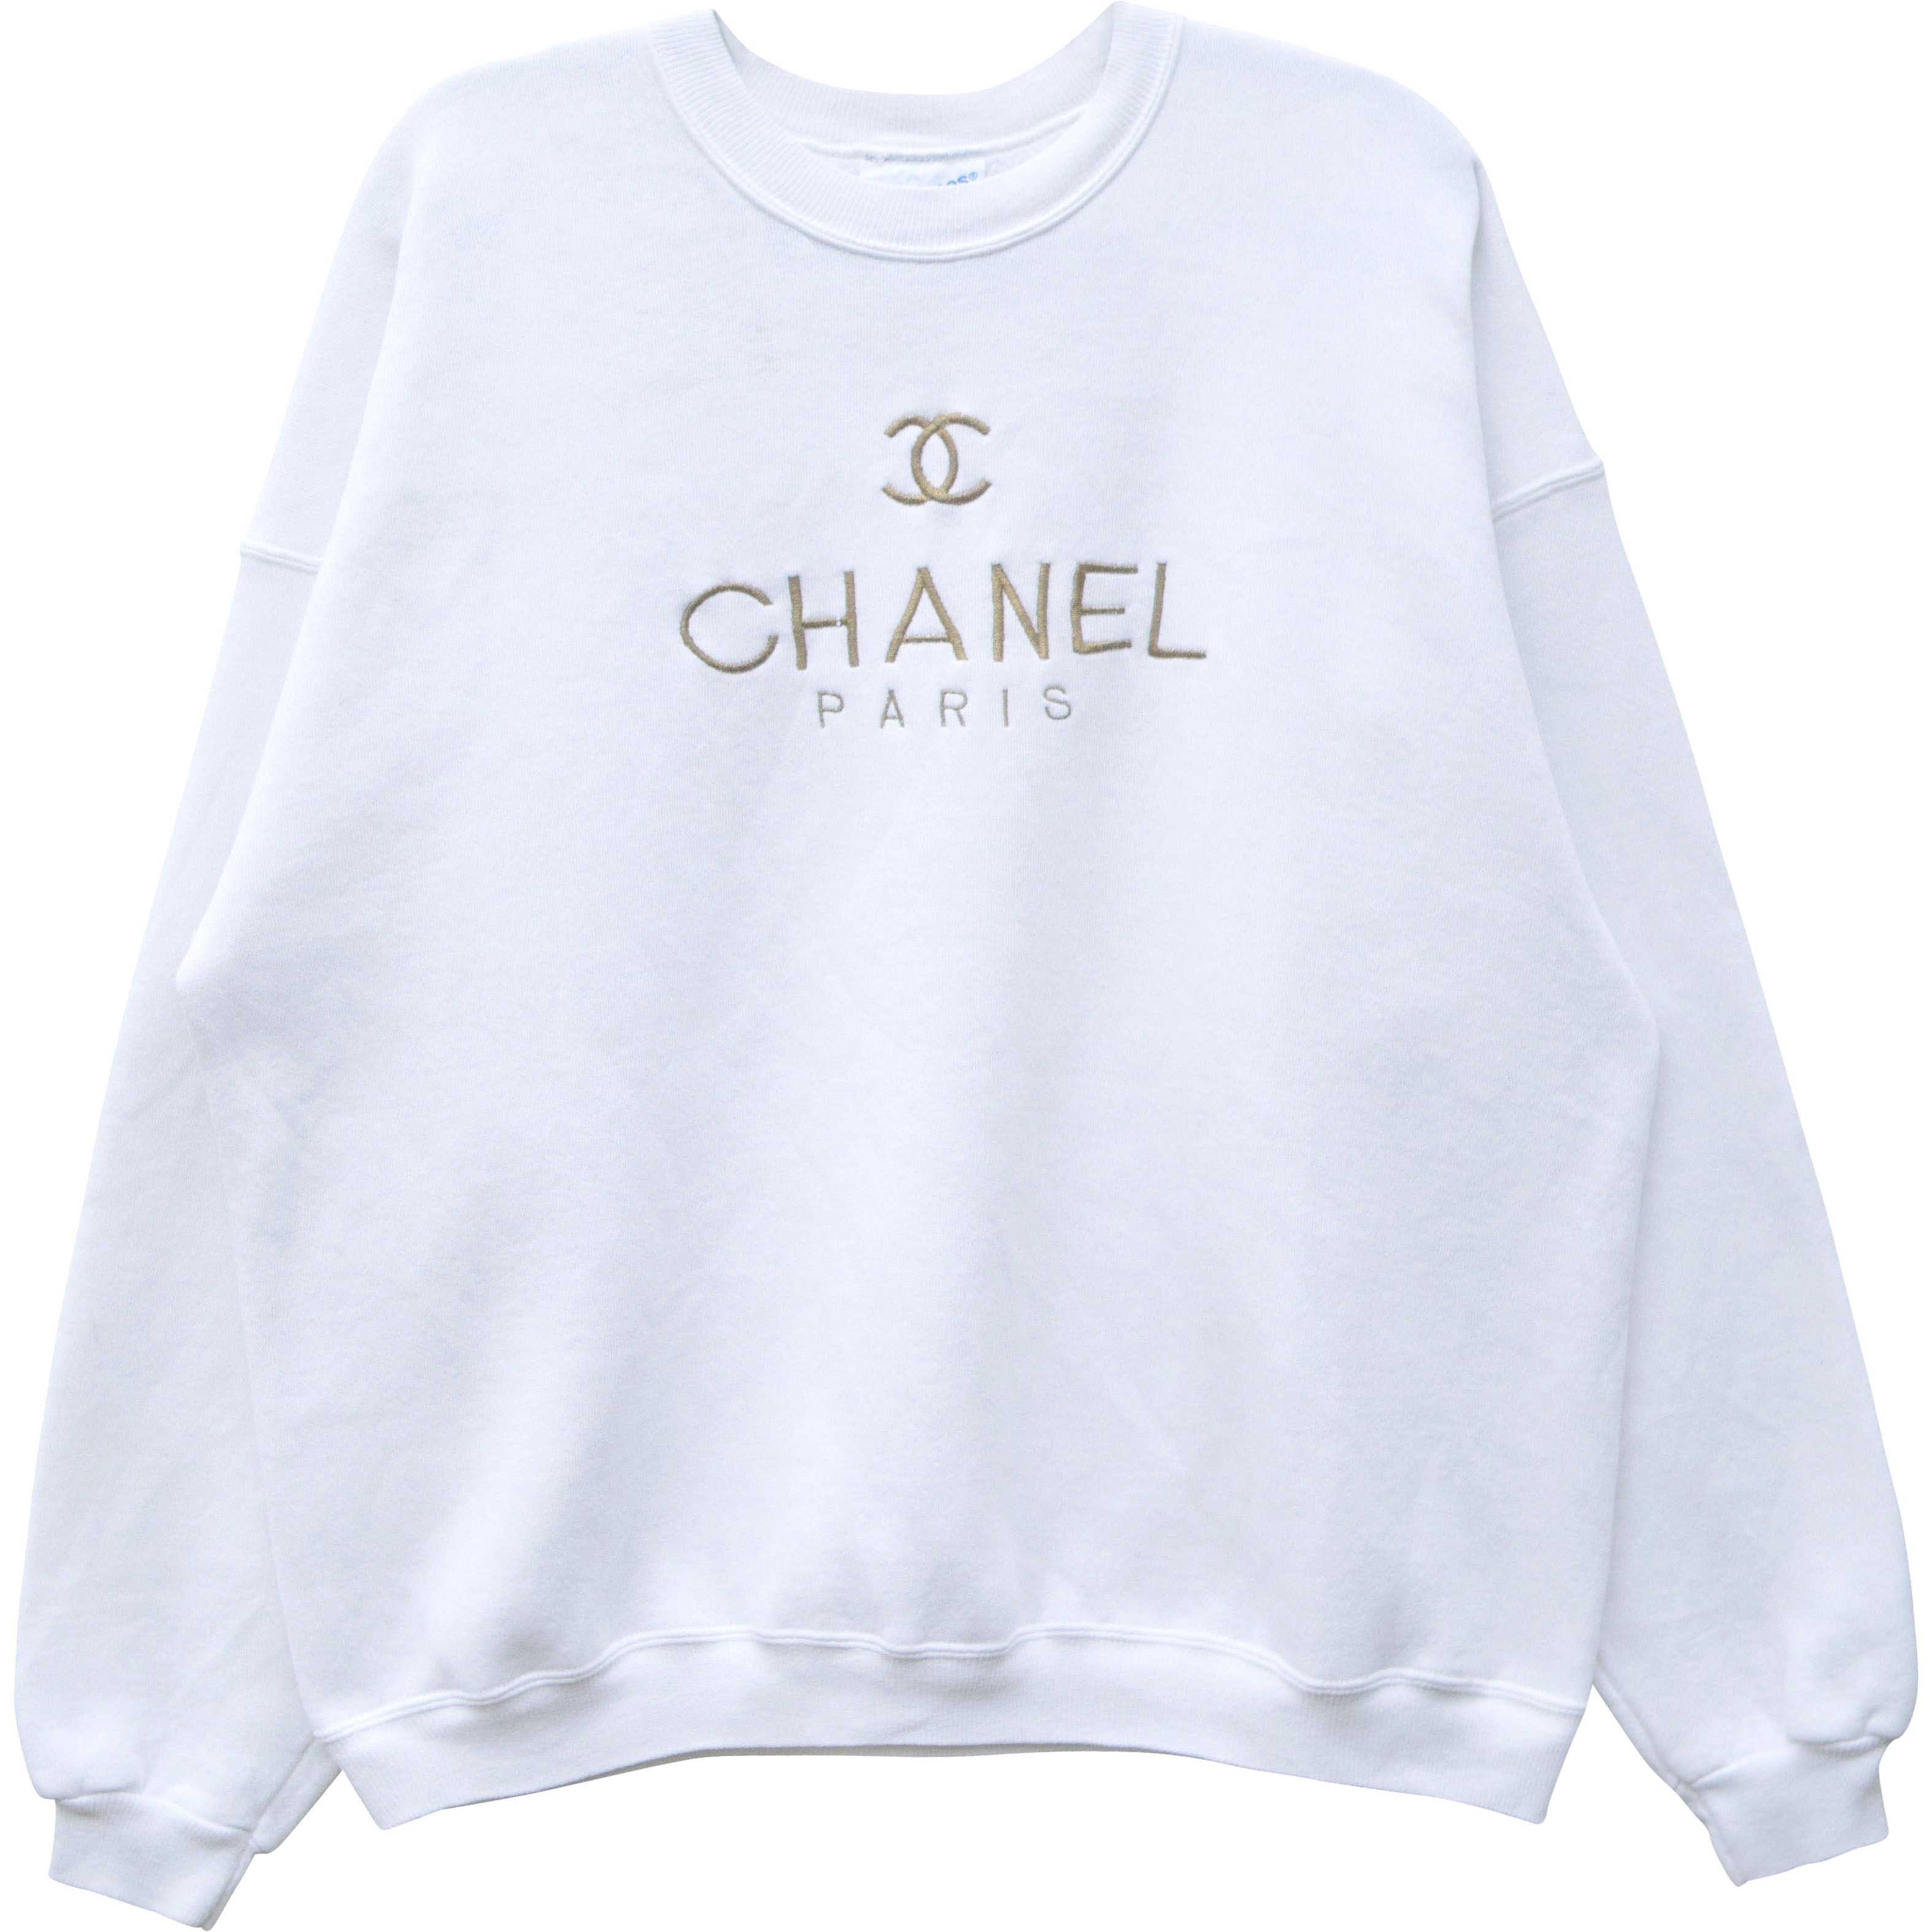 VINTAGE BOOTLEG CHANEL SWEATER- SIZE S-3XL – Gone Tomorrow Vintage